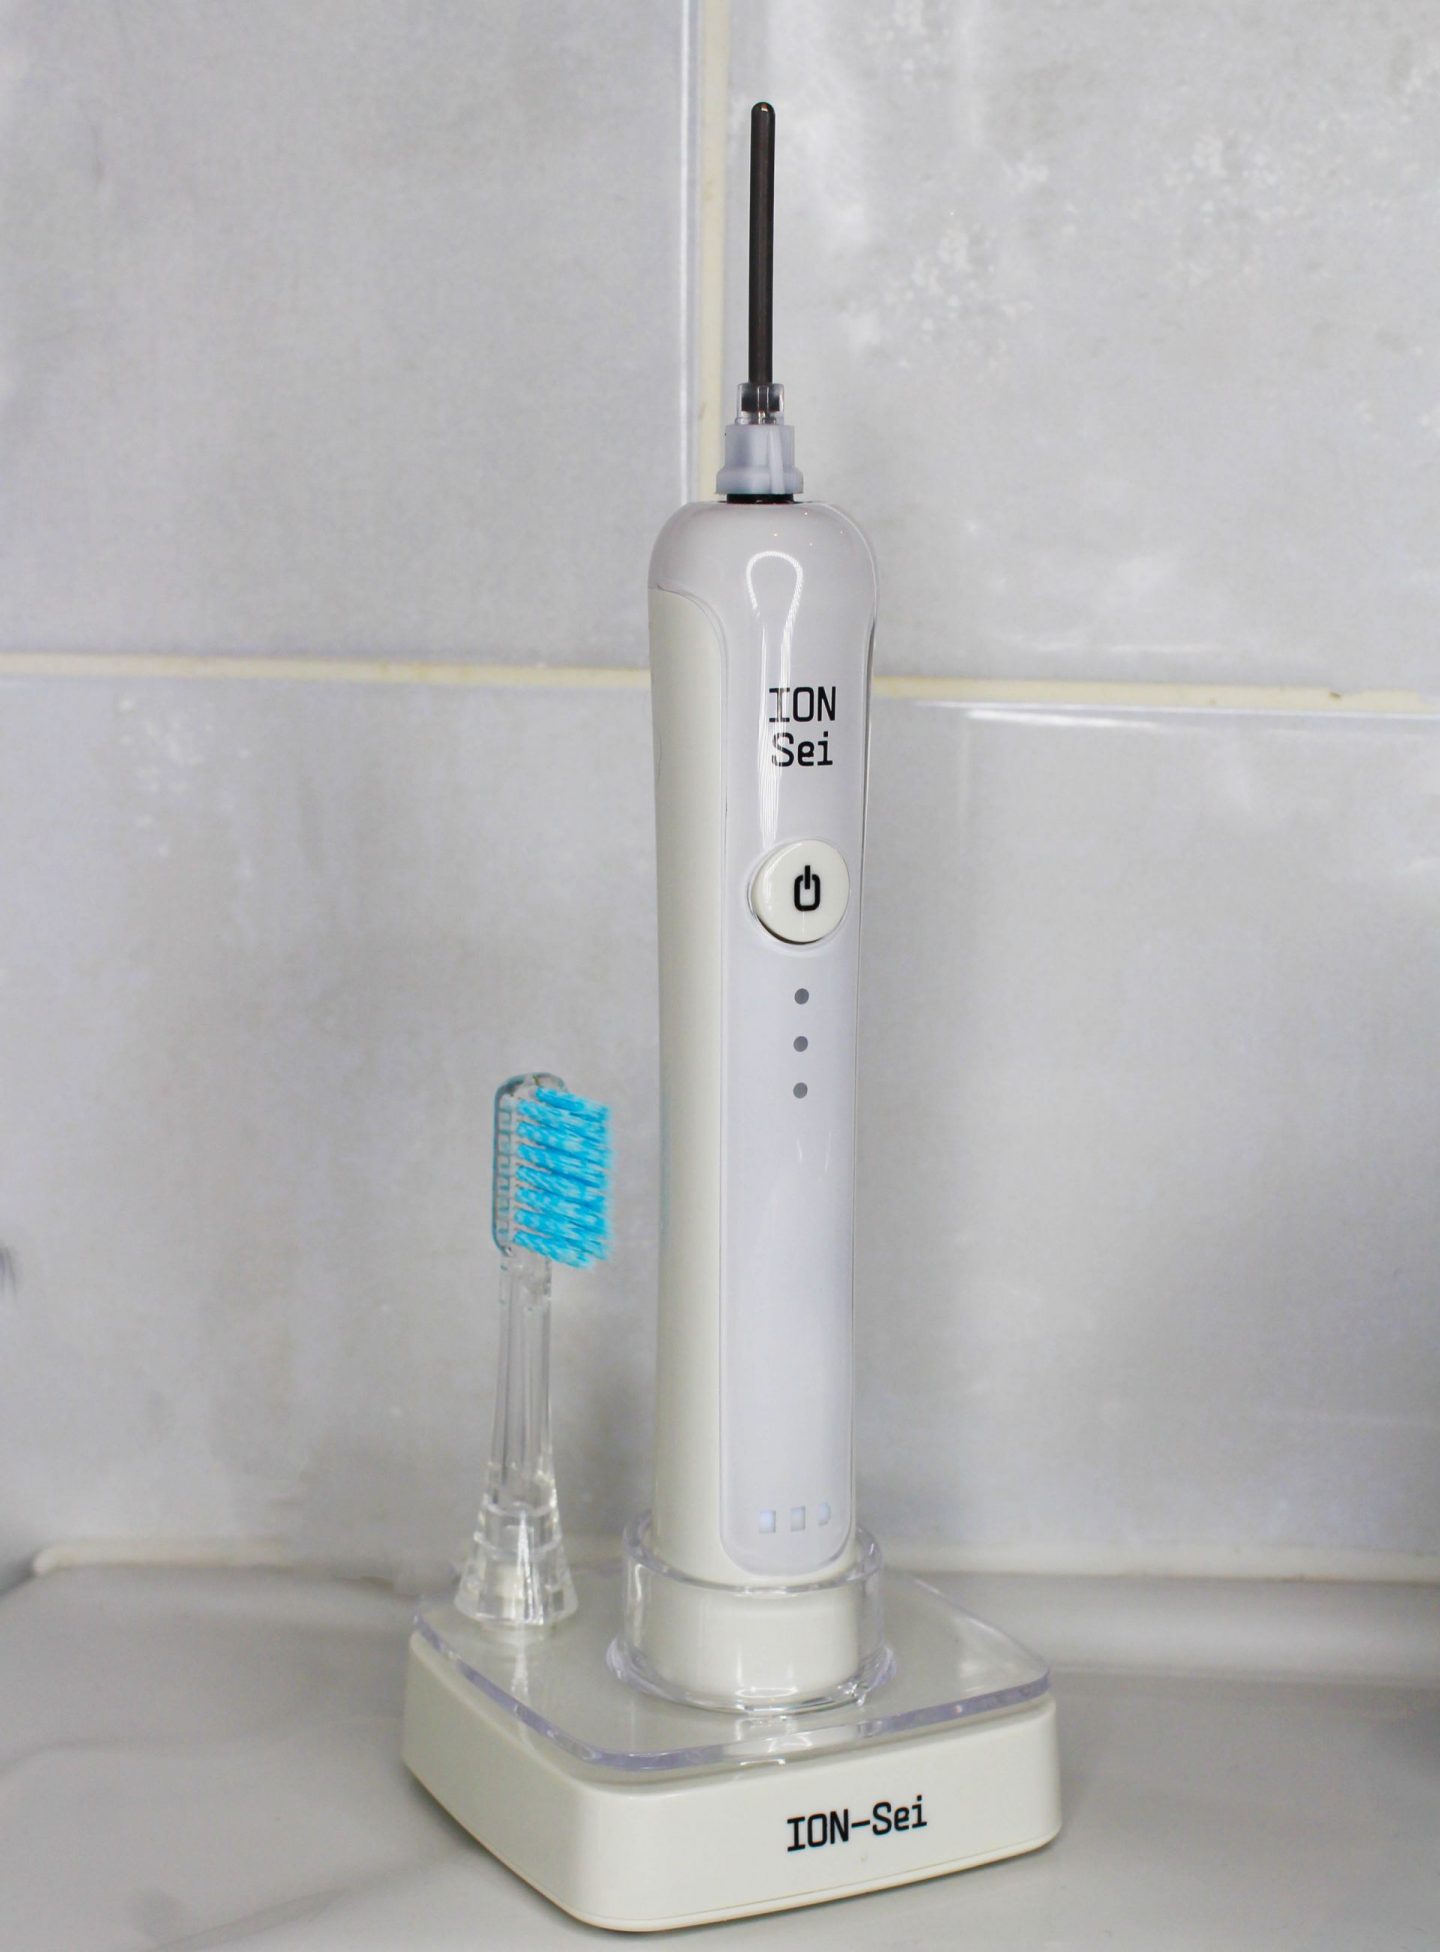 toothbrush, electric toothbrush review